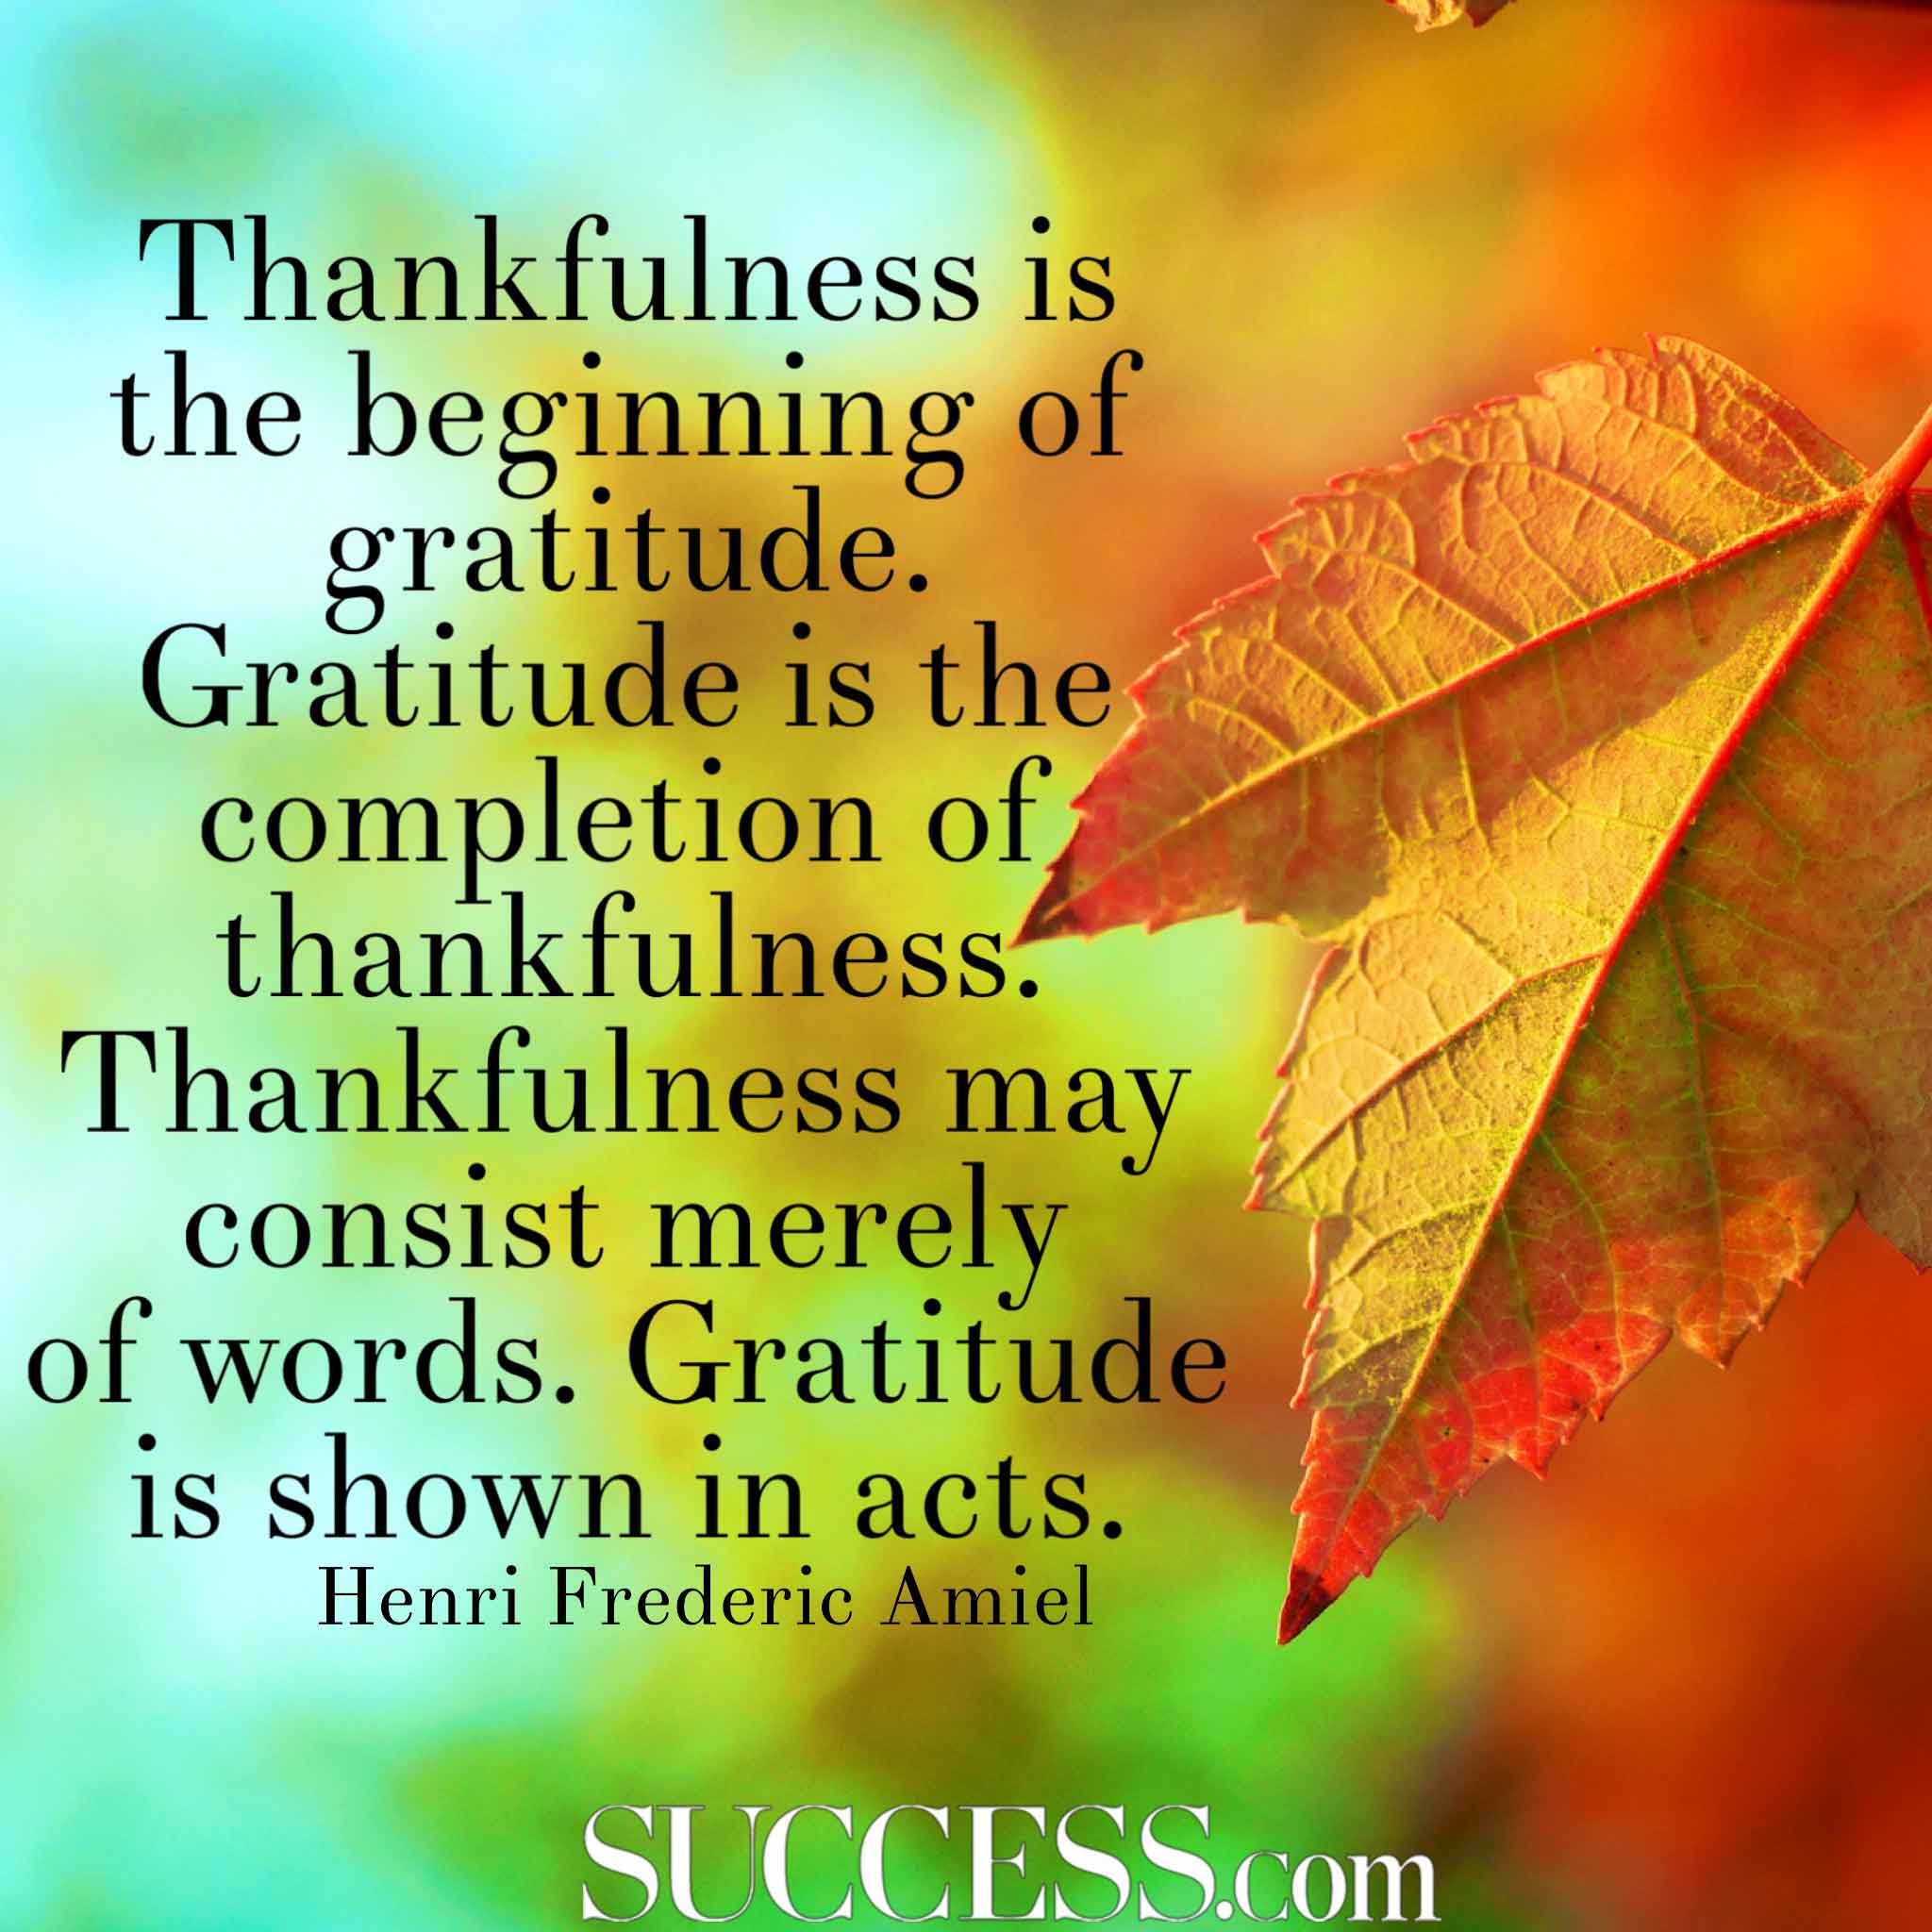 15 Thoughtful Quotes About Gratitude | SUCCESS